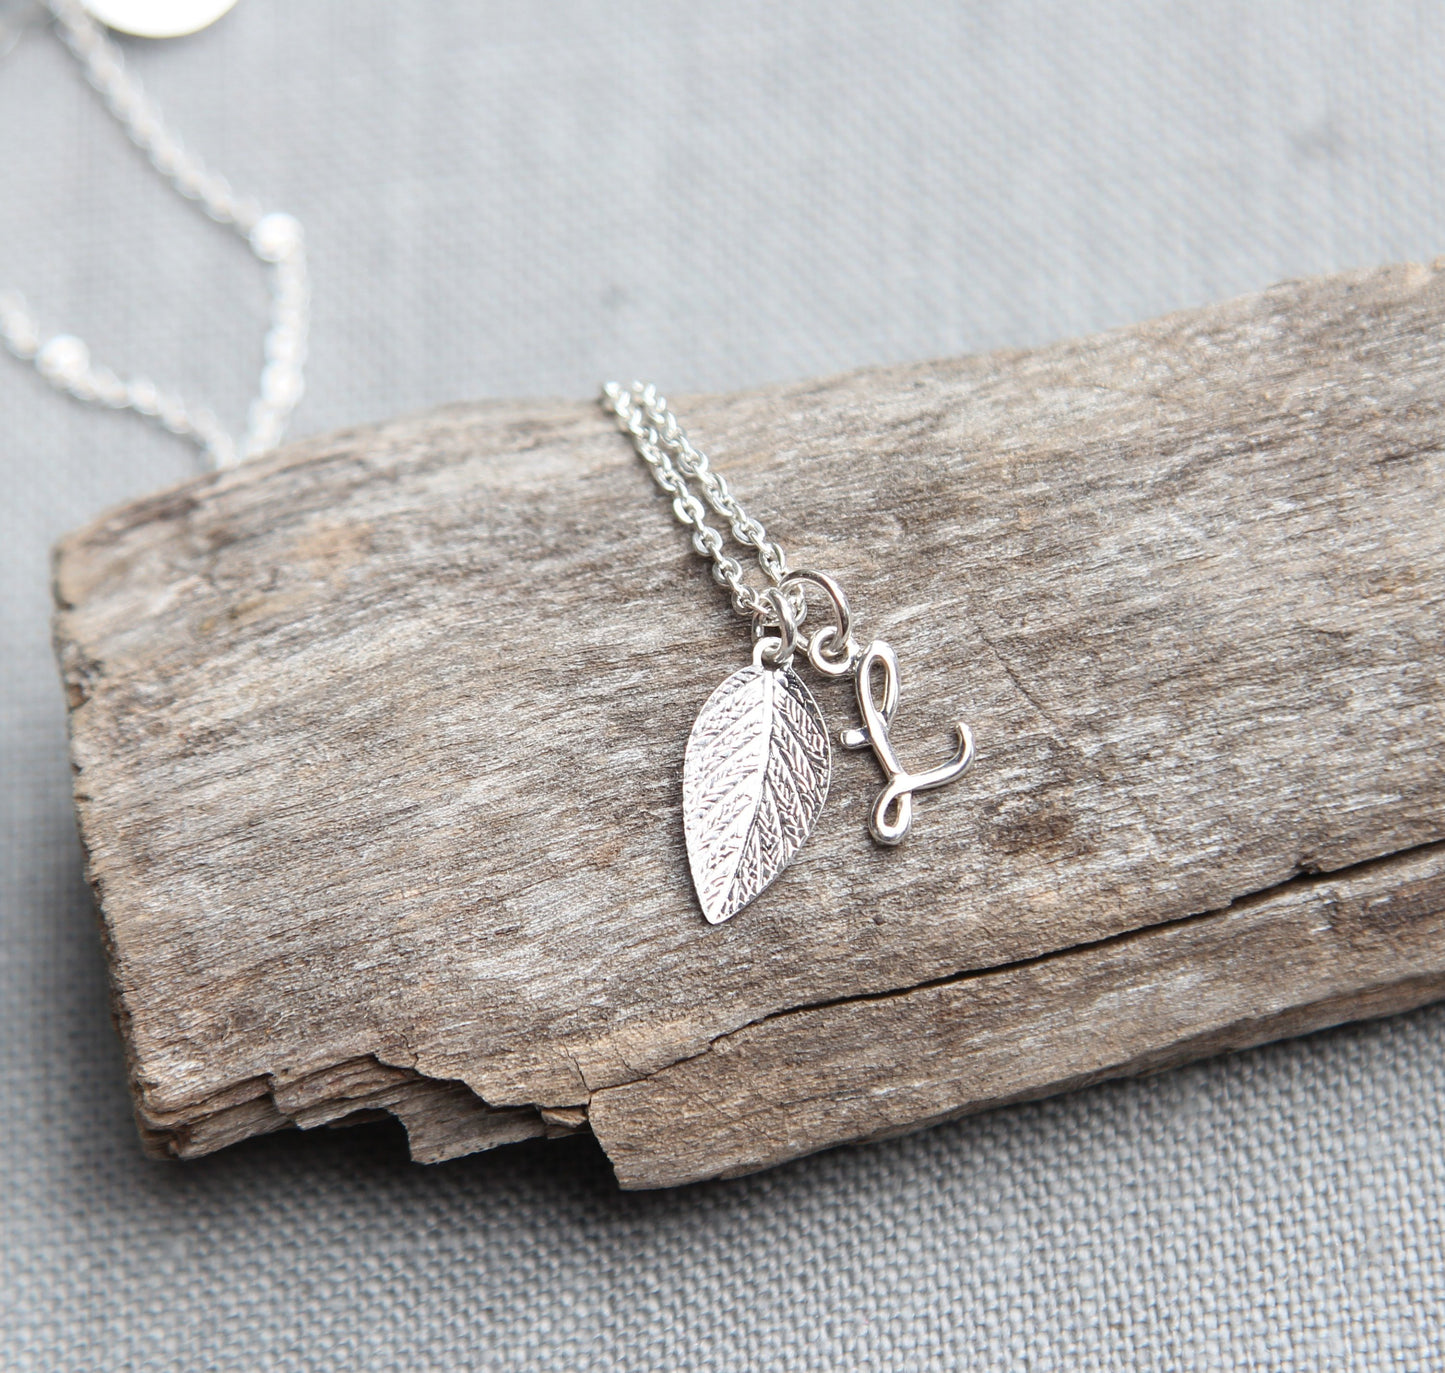 Nature inspired Jewelry for Bridesmaids